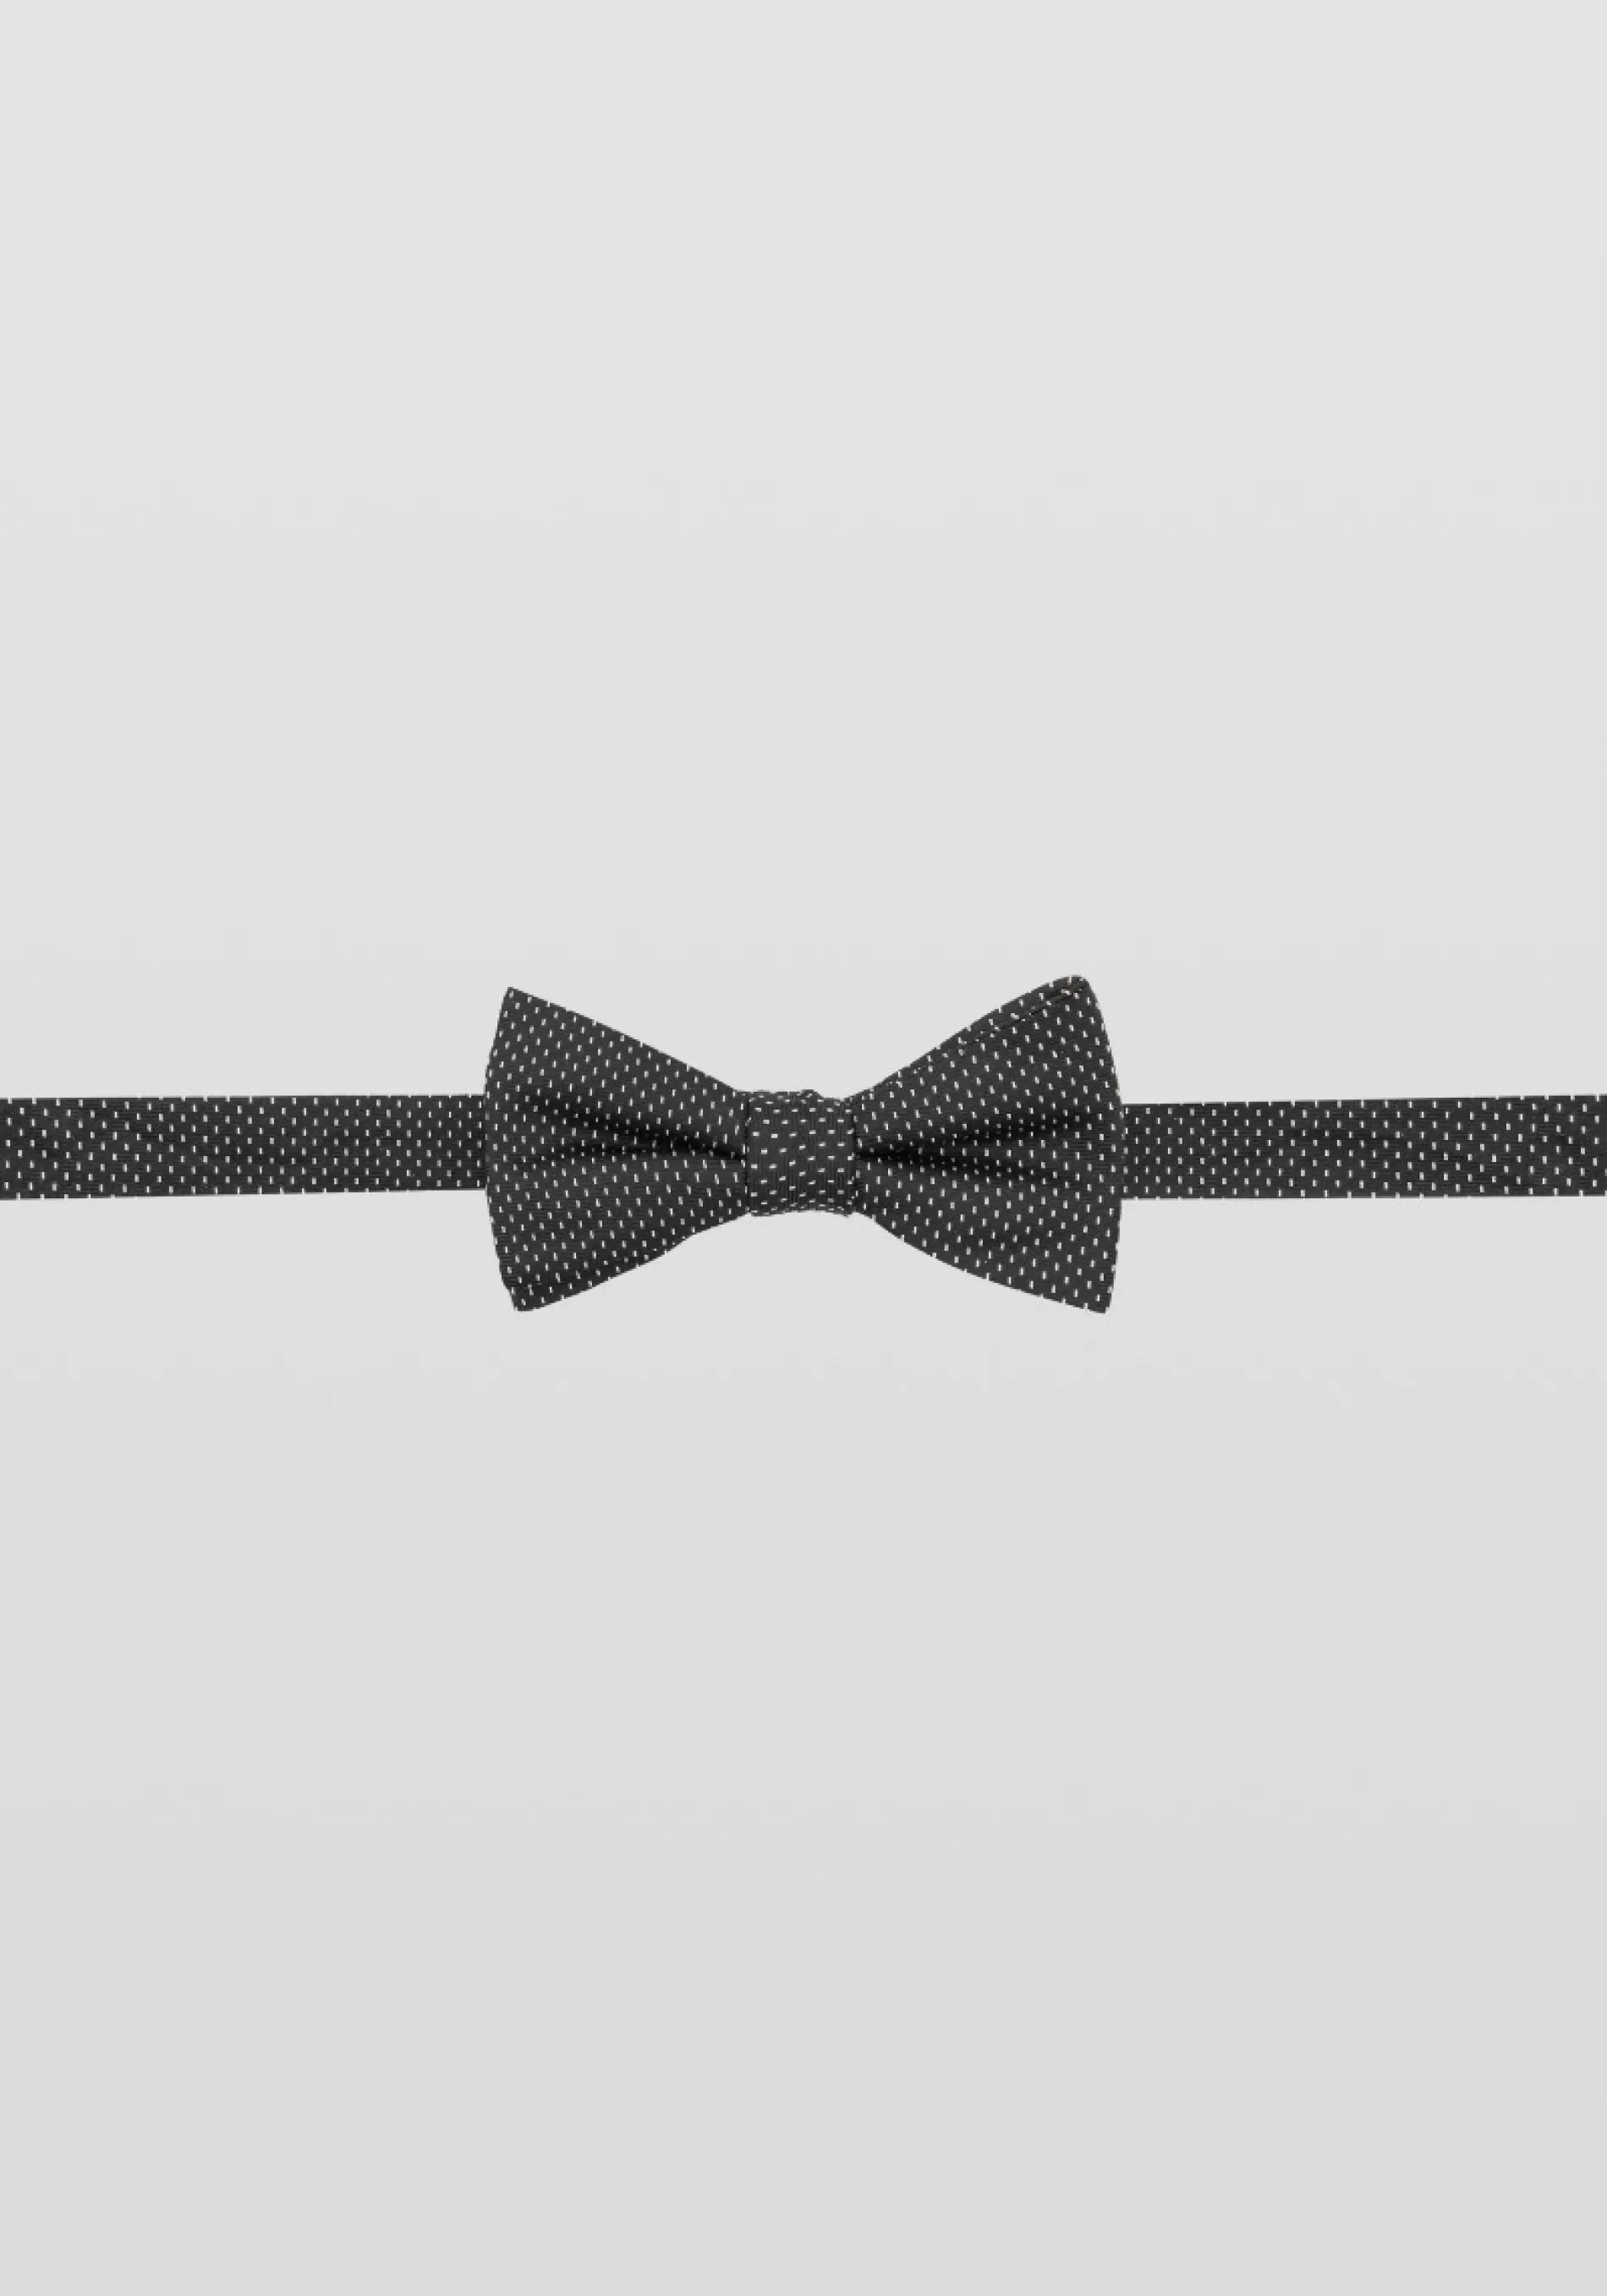 Online SILK BOW TIE WITH MICRODOTS Ties and Bow ties